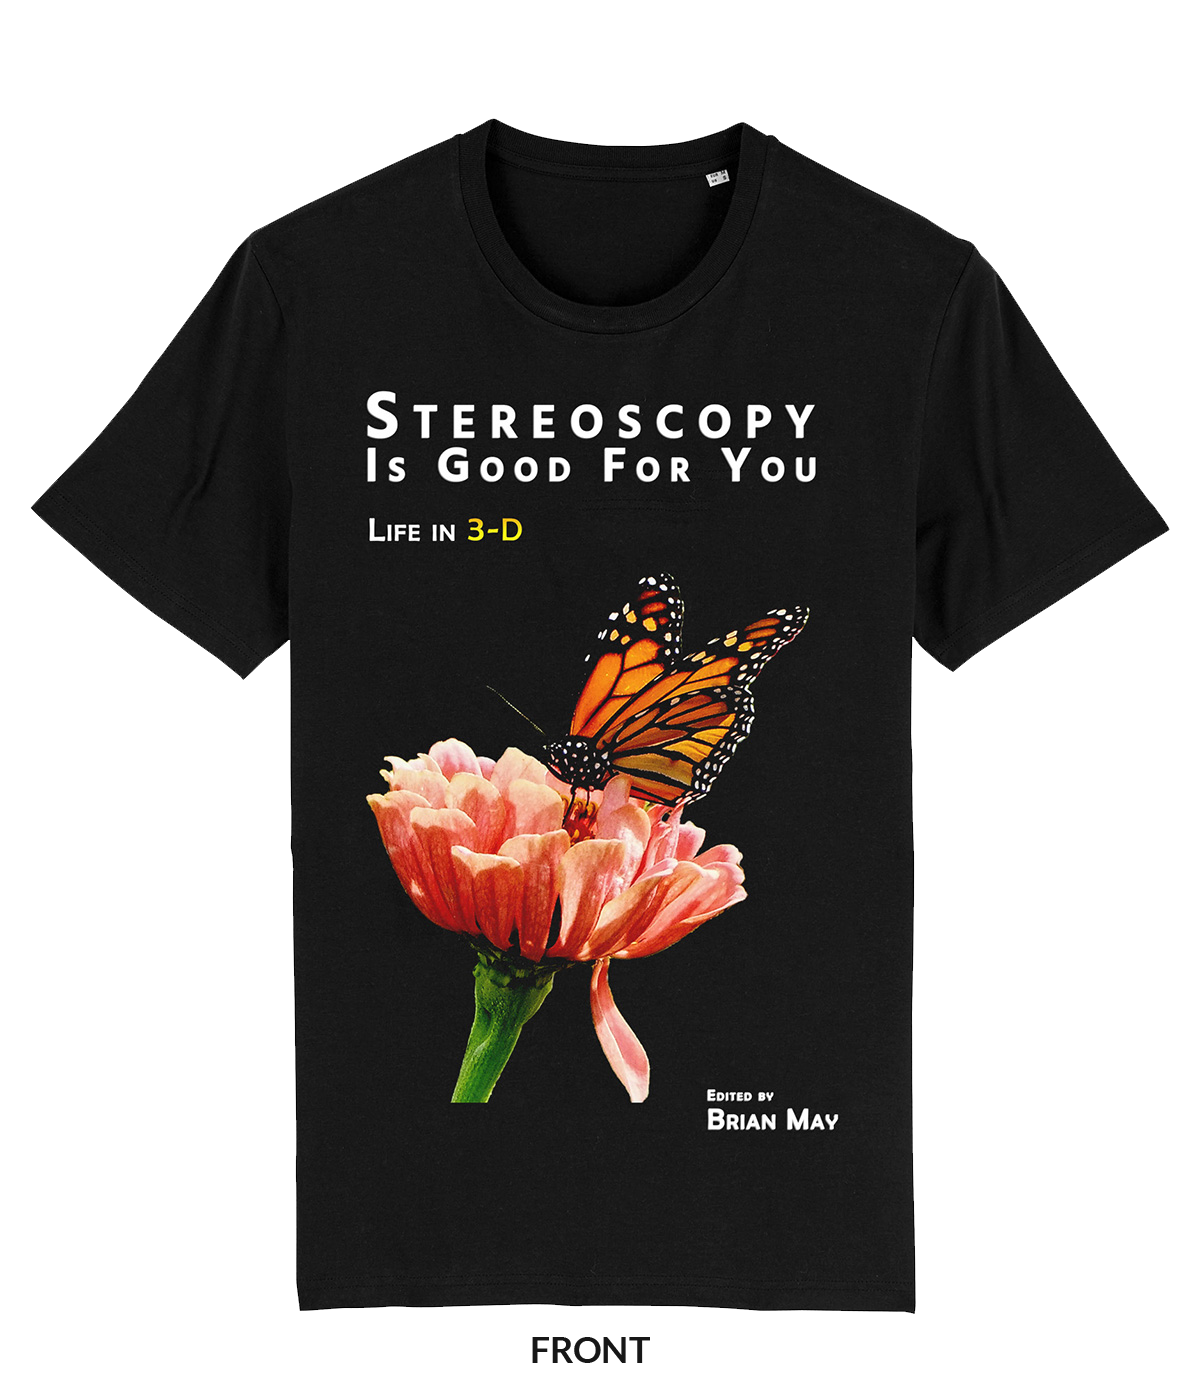 Stereoscopy Is Good For You: Life in 3-D T-Shirt [EXTRA LARGE]